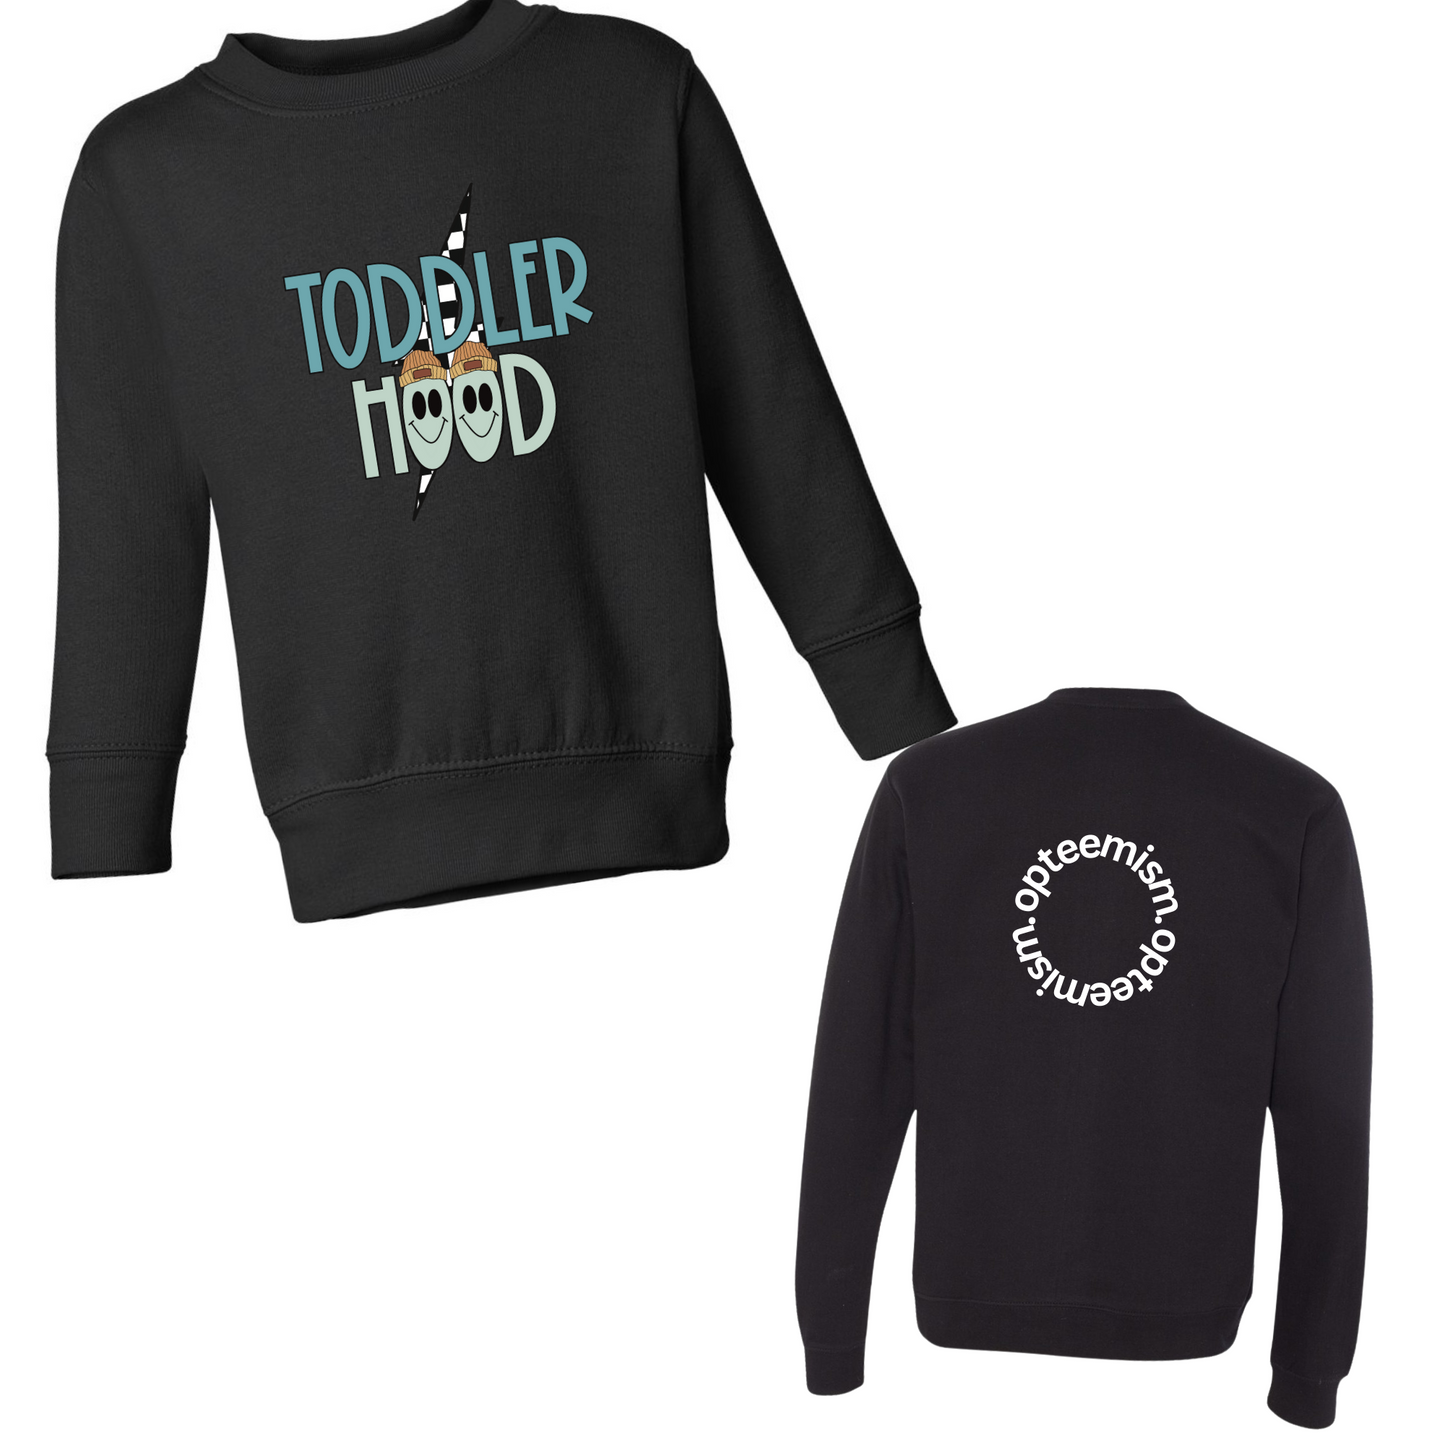 Toddler Hood Graphic Crew Neck Sweater With Opteemism Logo